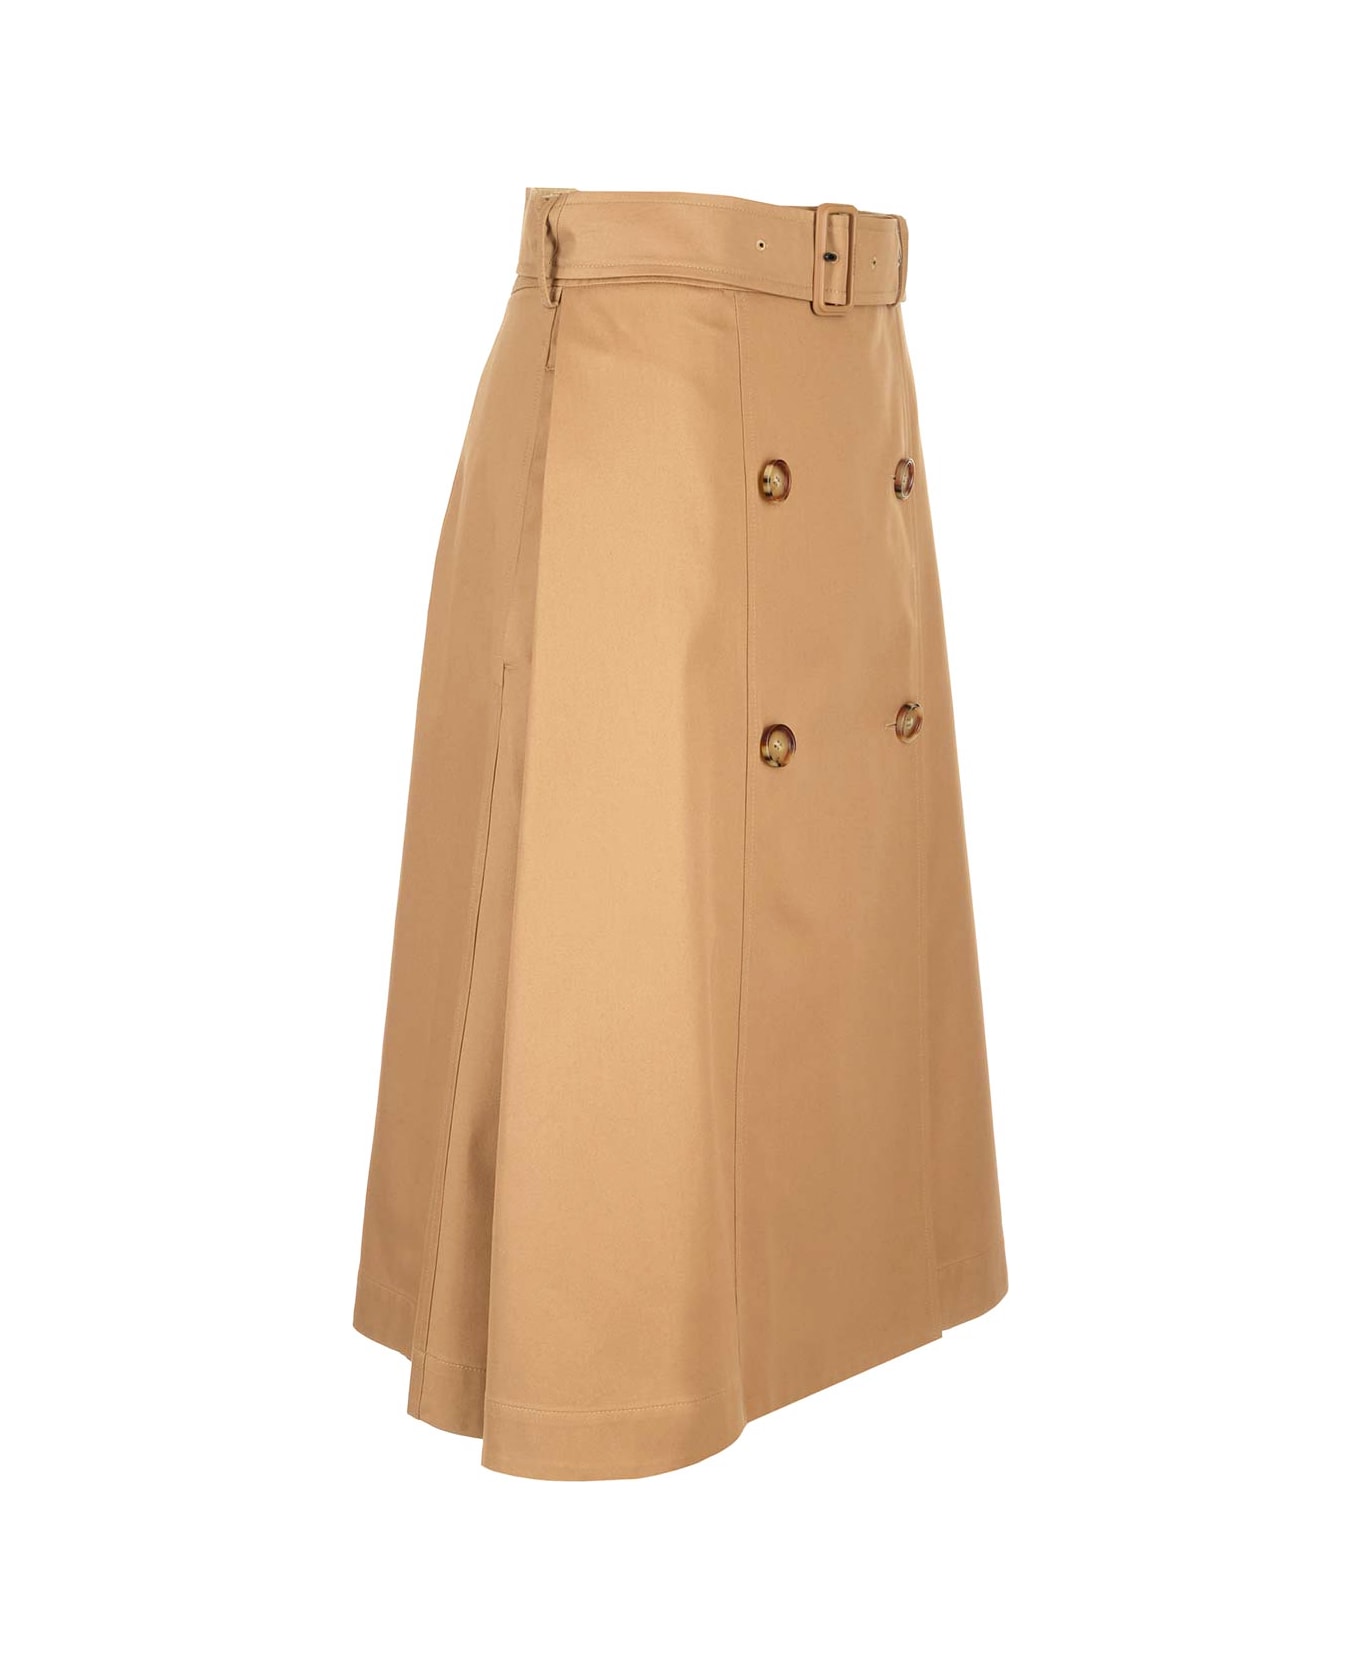 Burberry 'baleigh' Trench-style Skirt - Beige